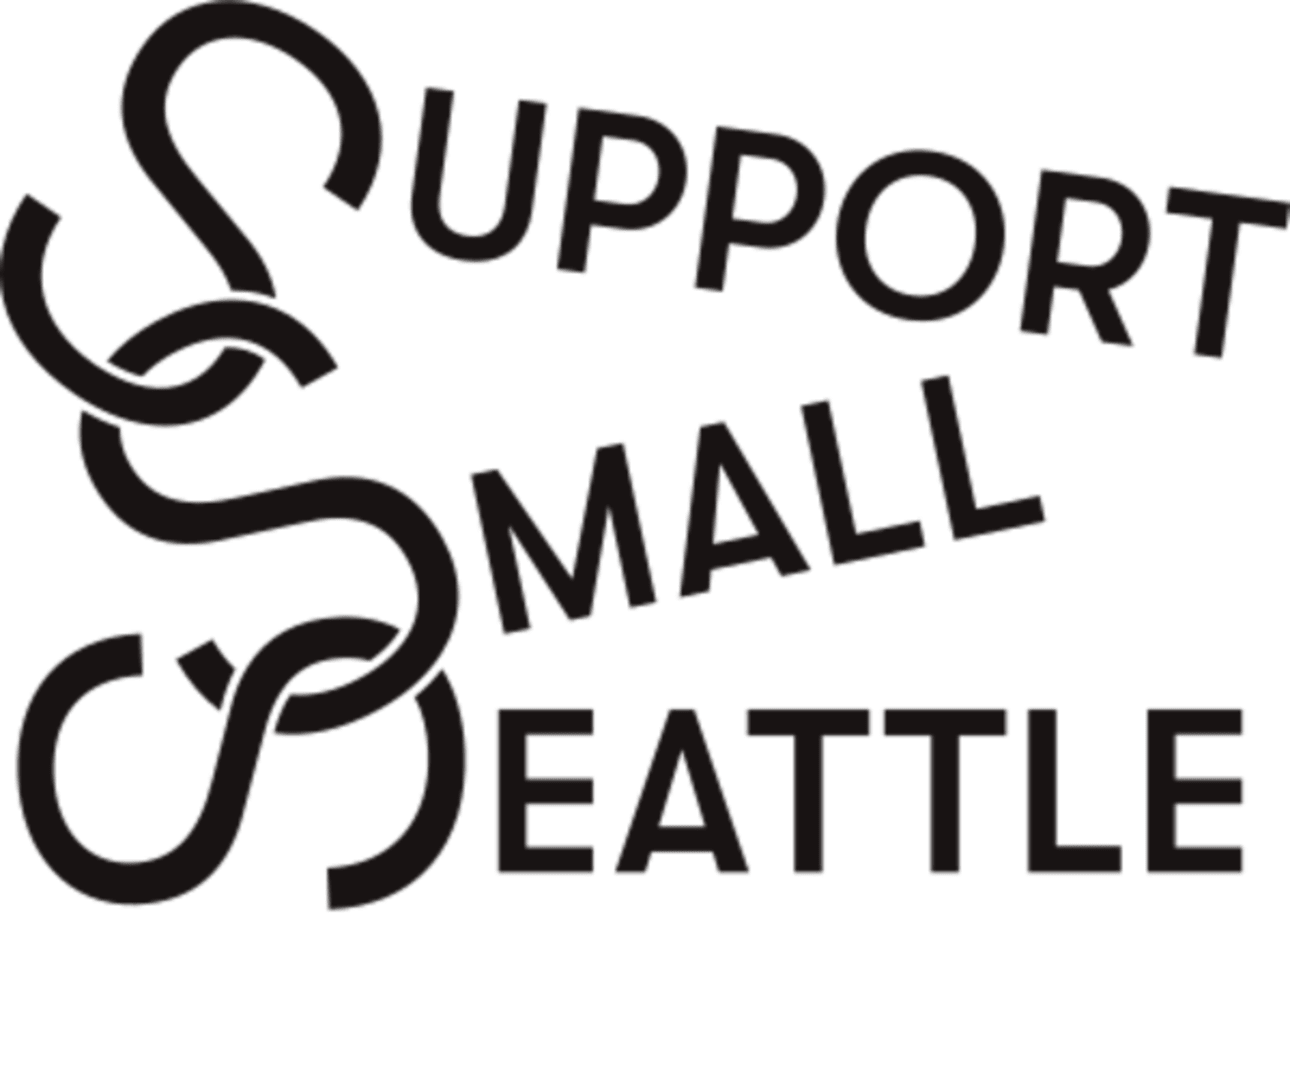 Support Small Seattle